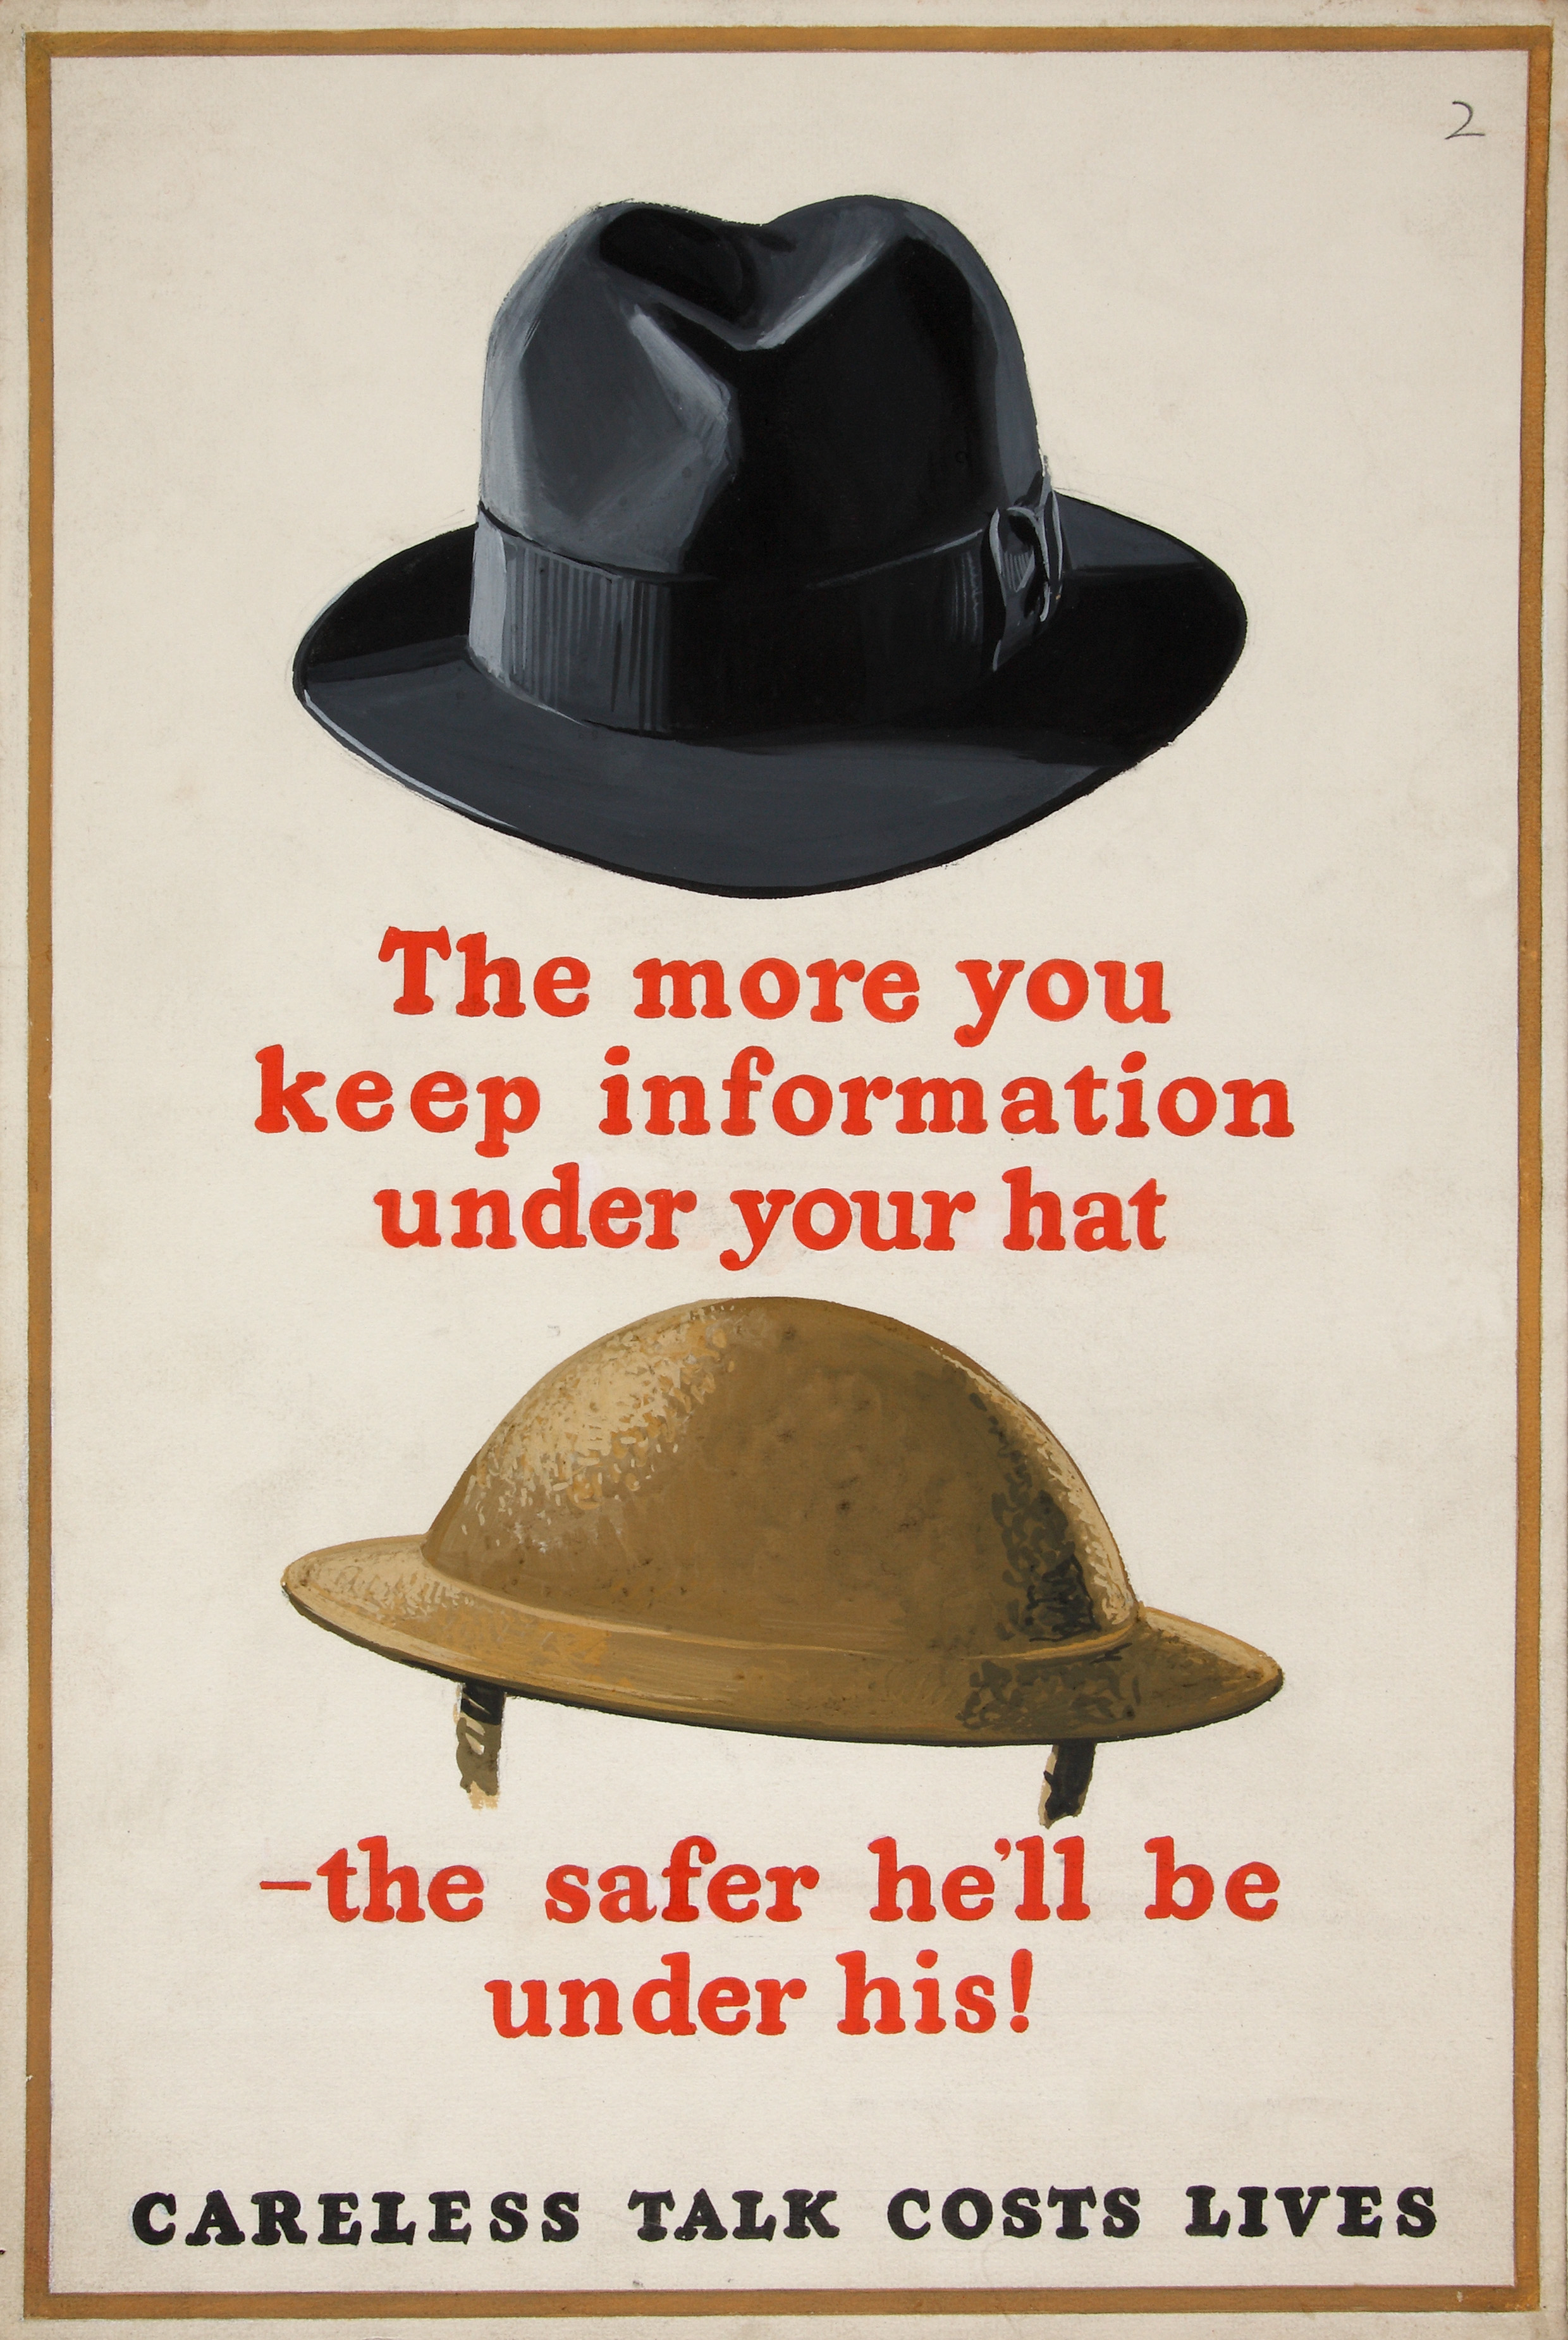 INF3-235 Anti-rumour and careless talk The more you keep information under your hat, the safer he'll be under his